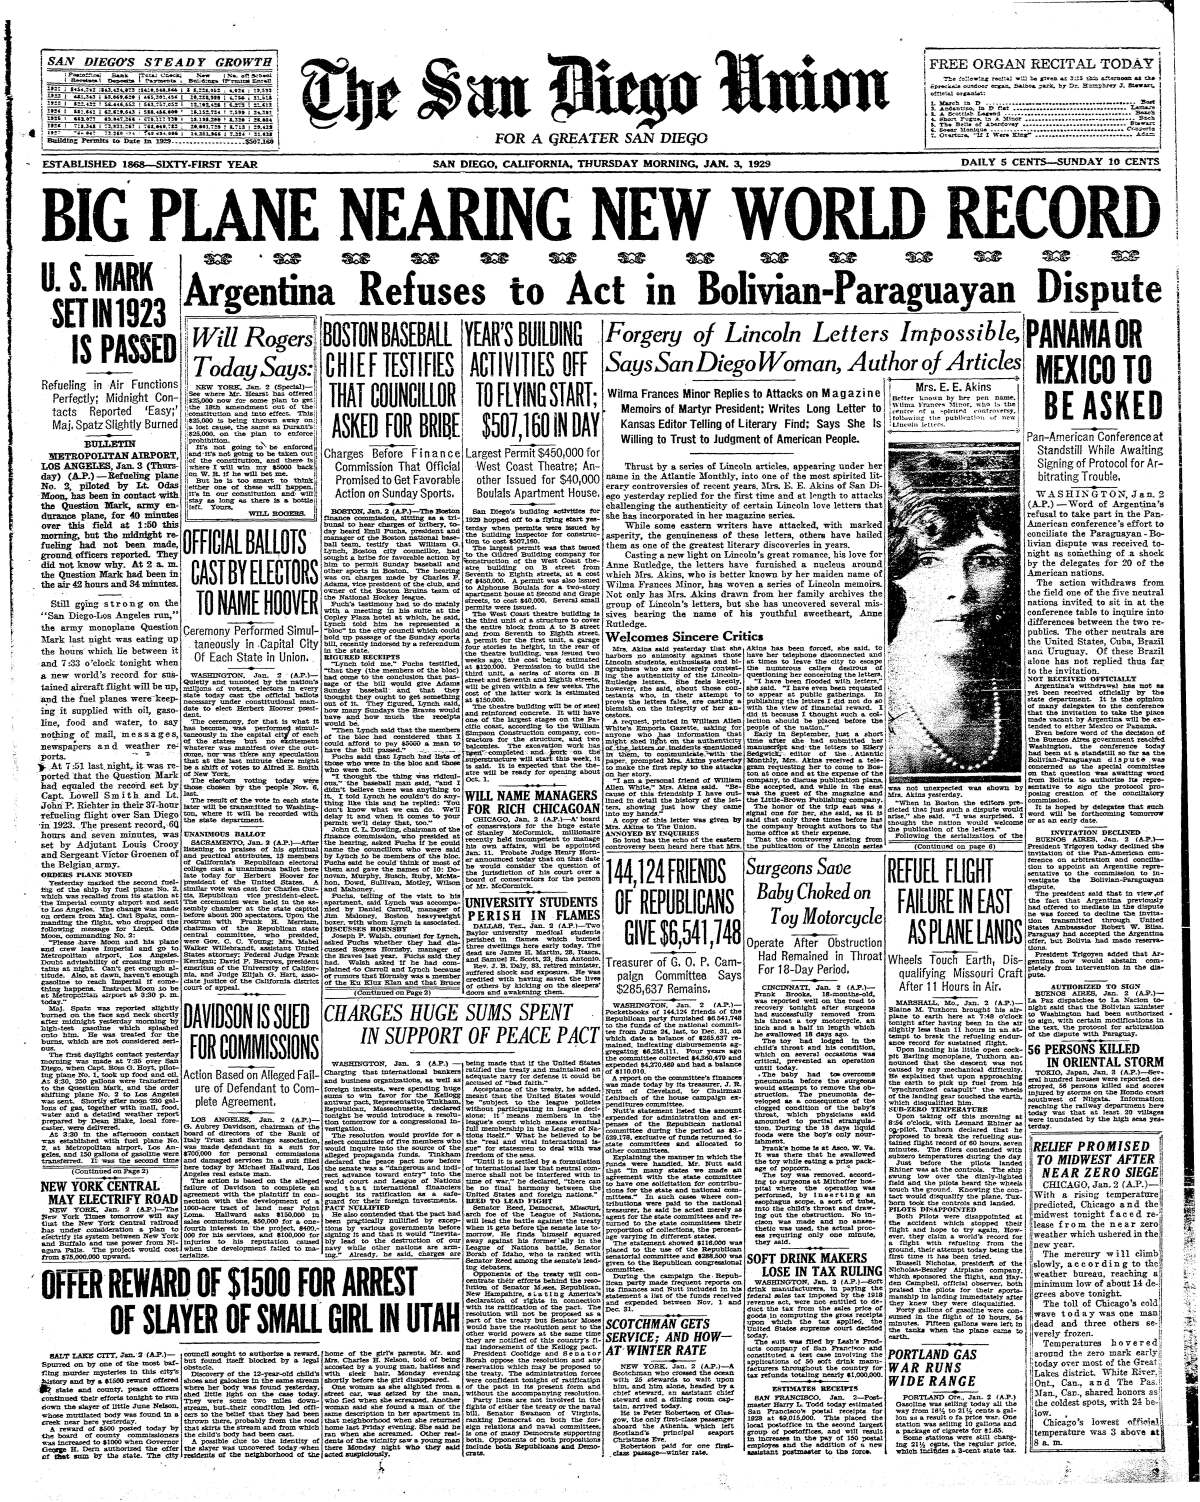 Jan. 3, 1929 San Diego Union front page.